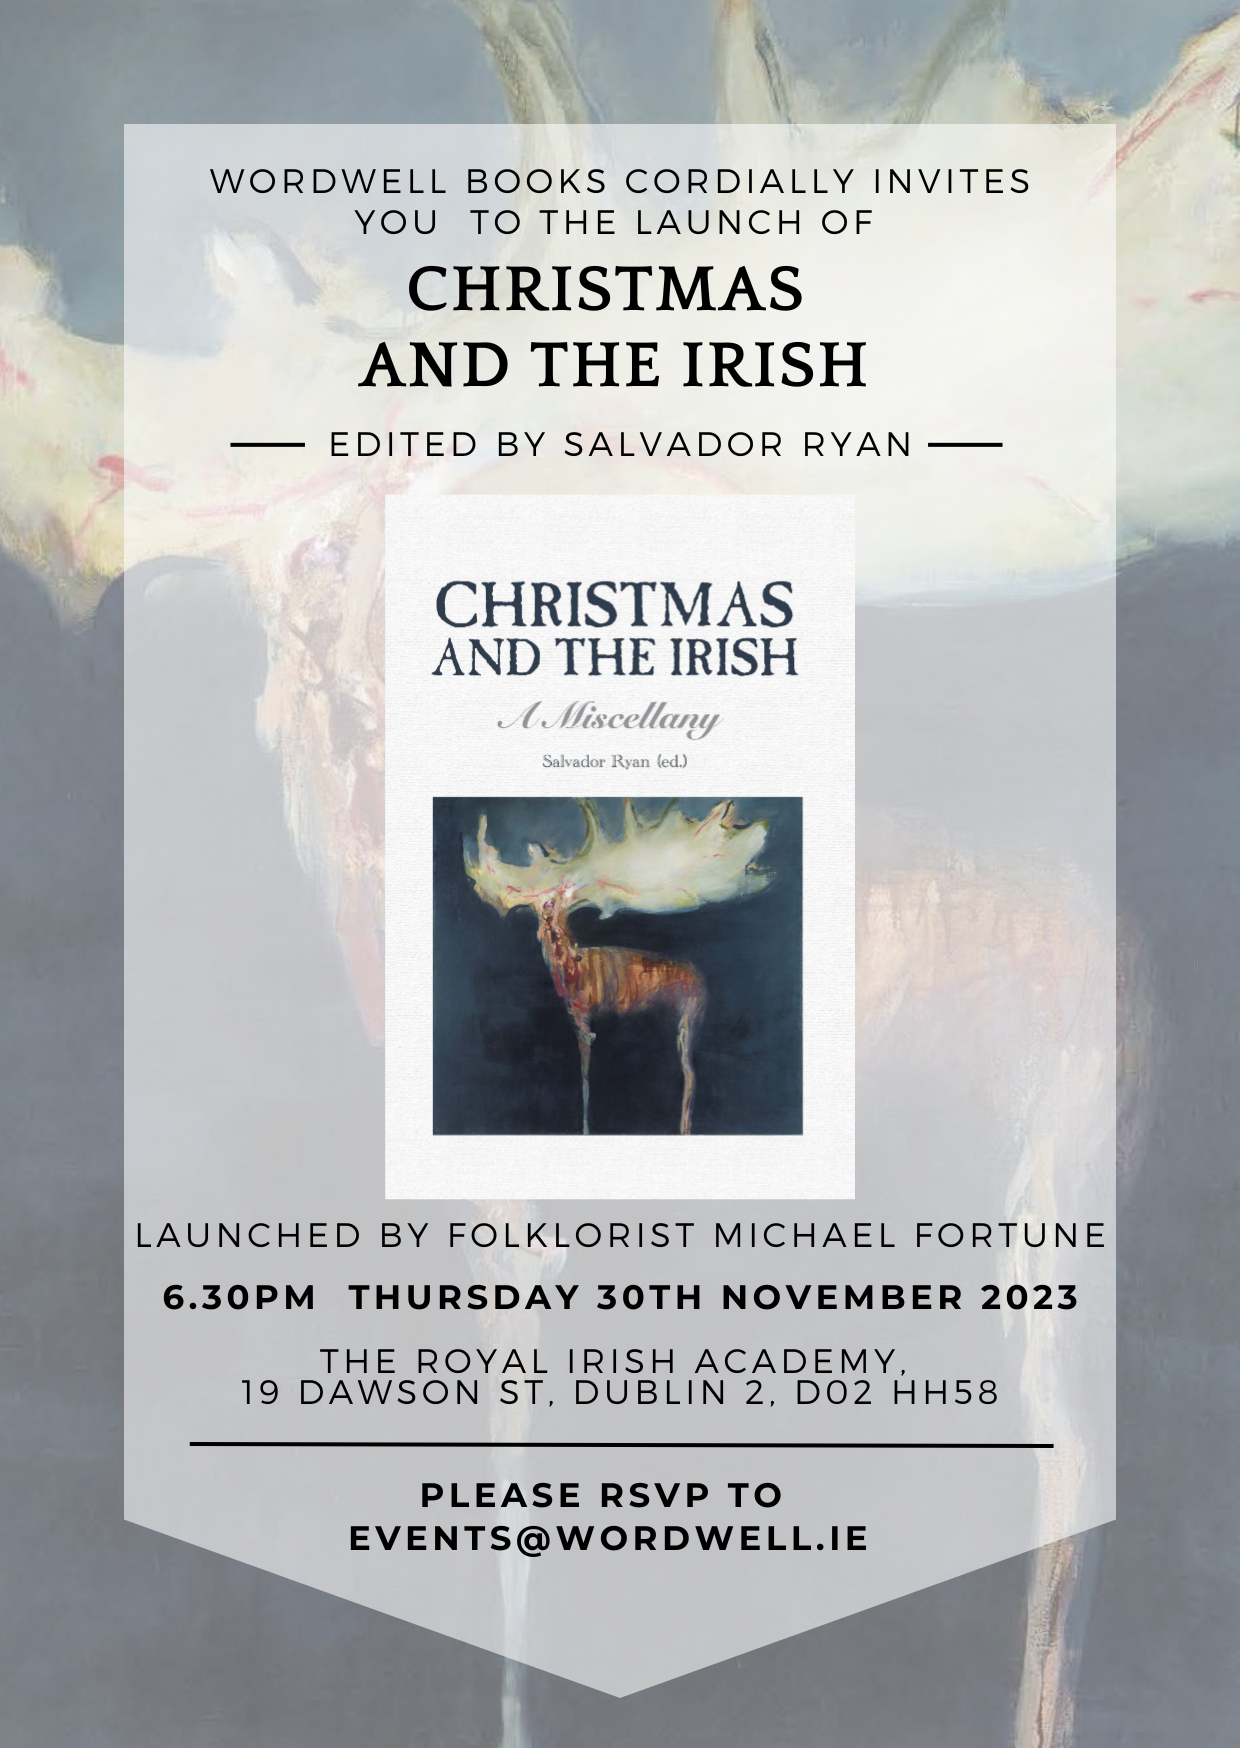 Christmas-and-the-Irish-launch-invite-RIA-30-November-2023.png#asset:14774